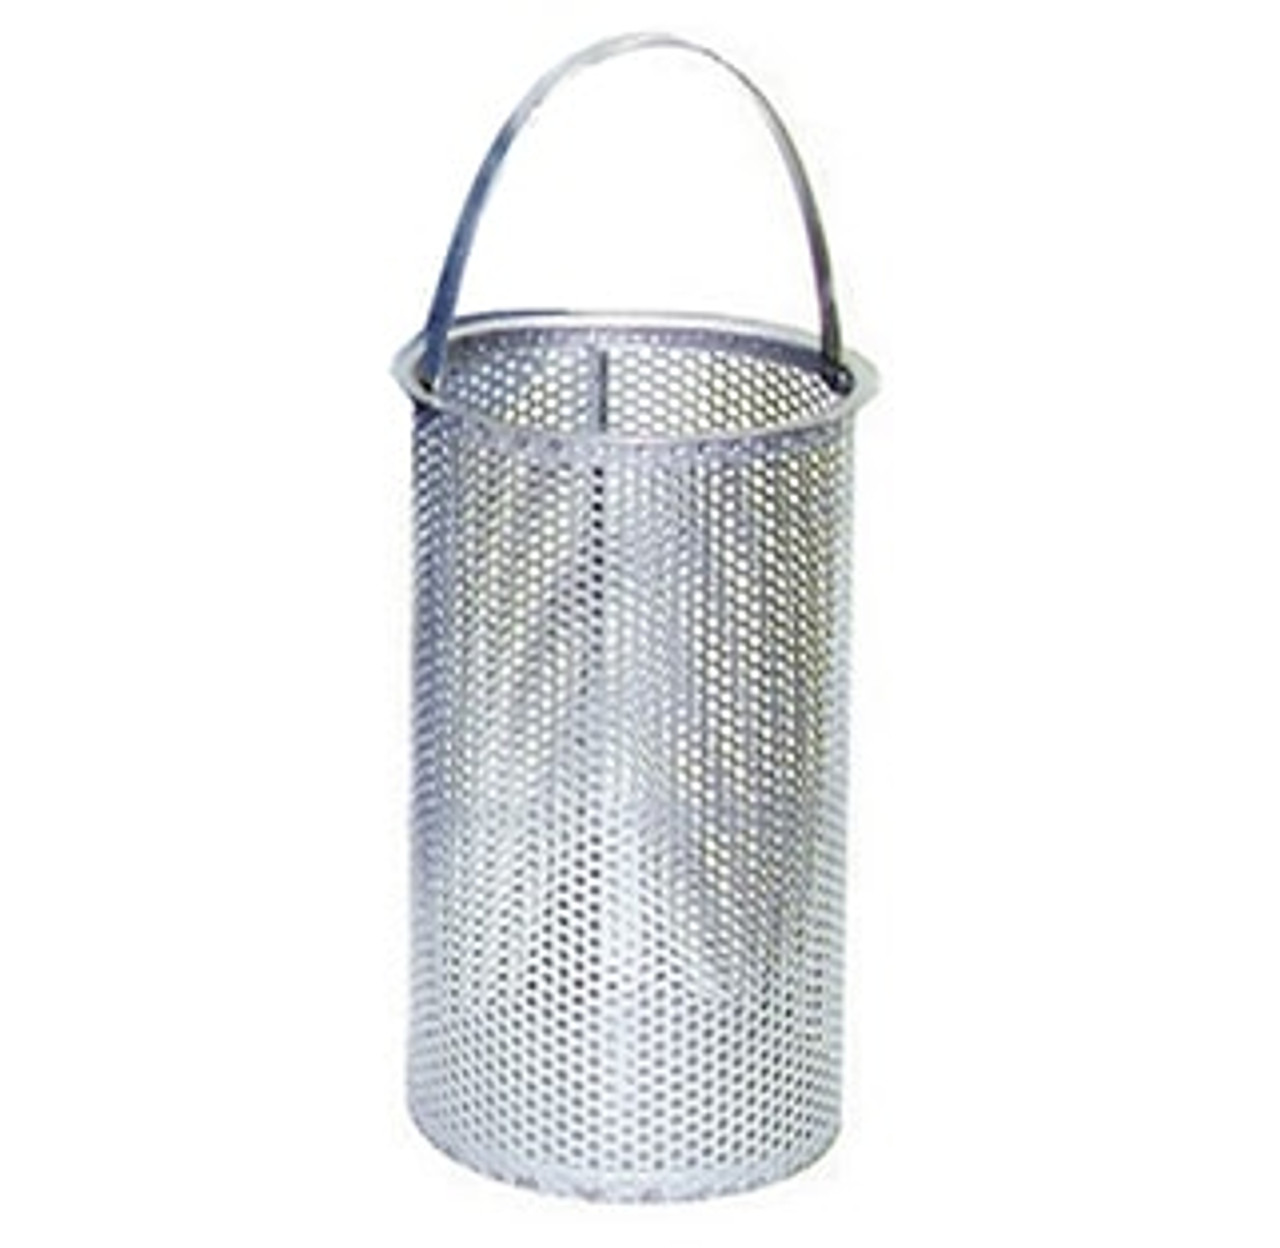 5/32" Perforated Replacement Basket for 4" Eaton Model 53BTX Strainer